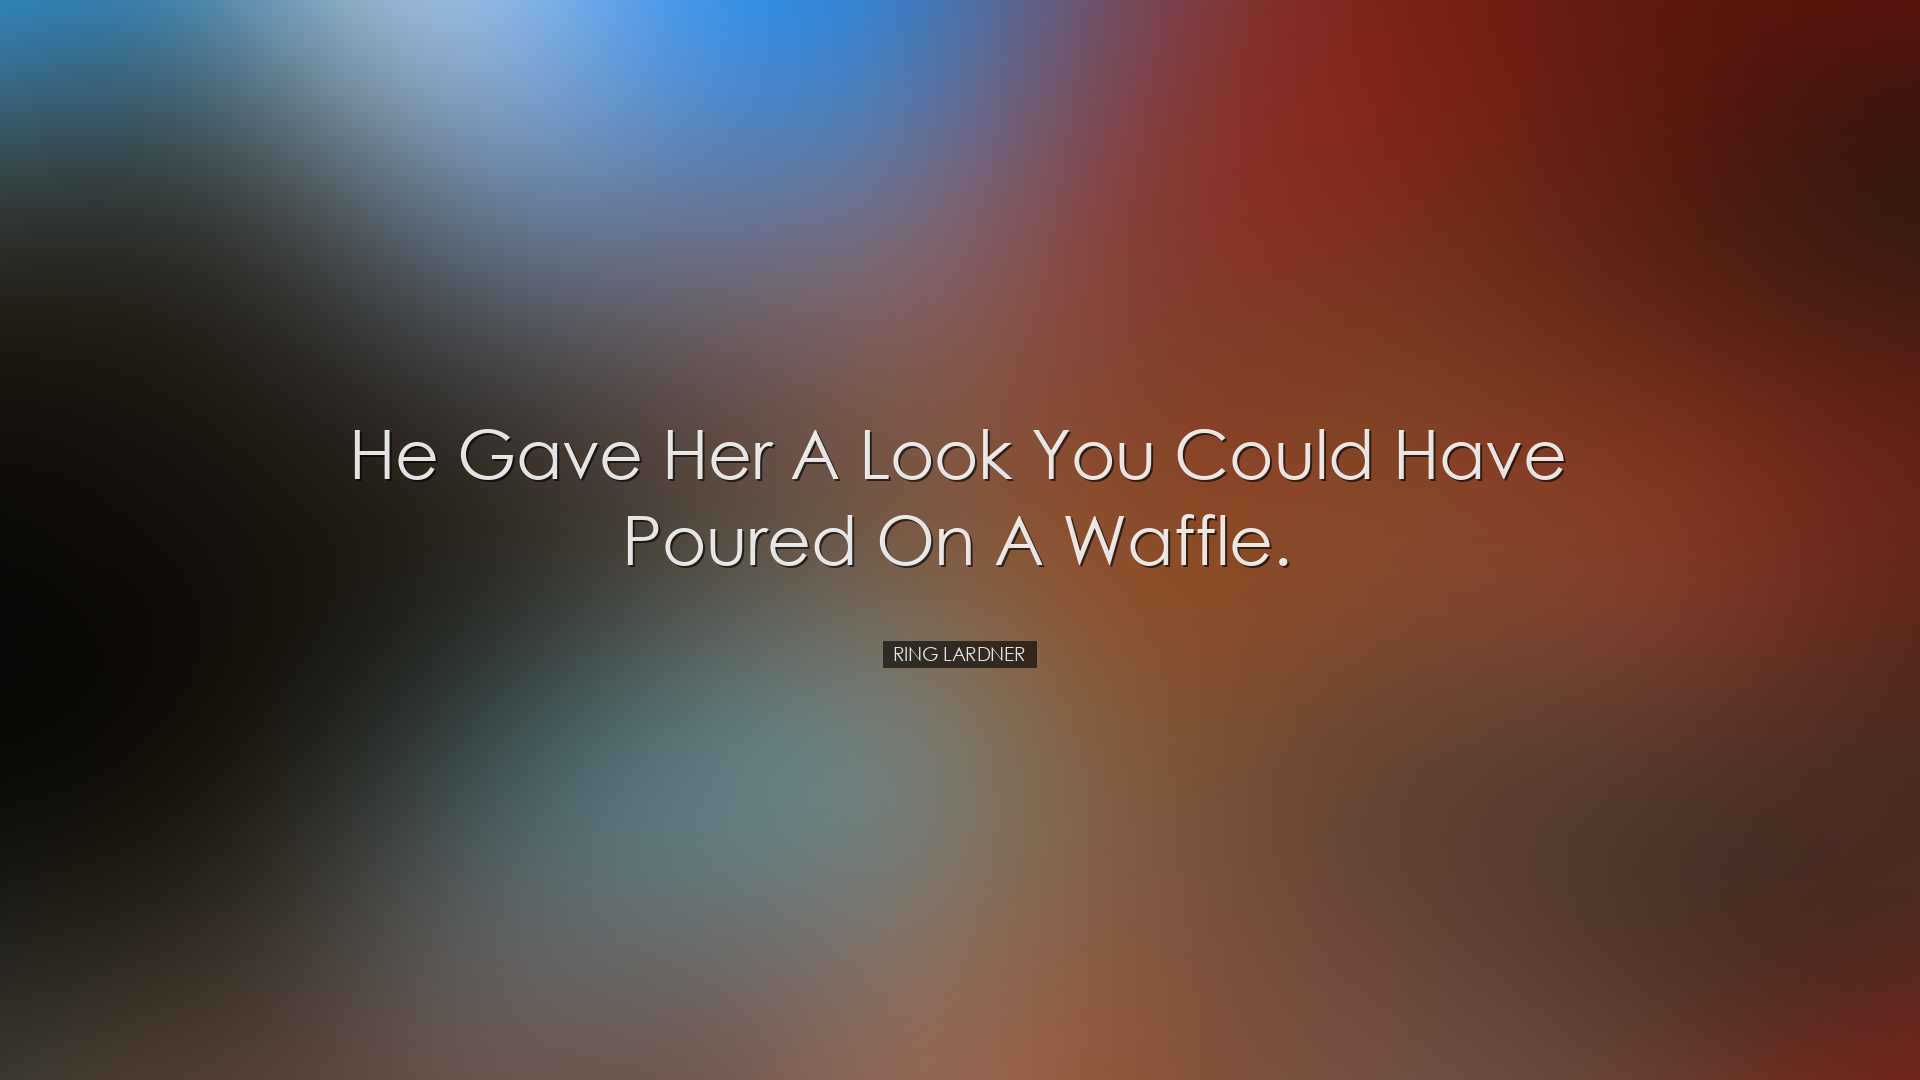 He gave her a look you could have poured on a waffle. - Ring Lardn